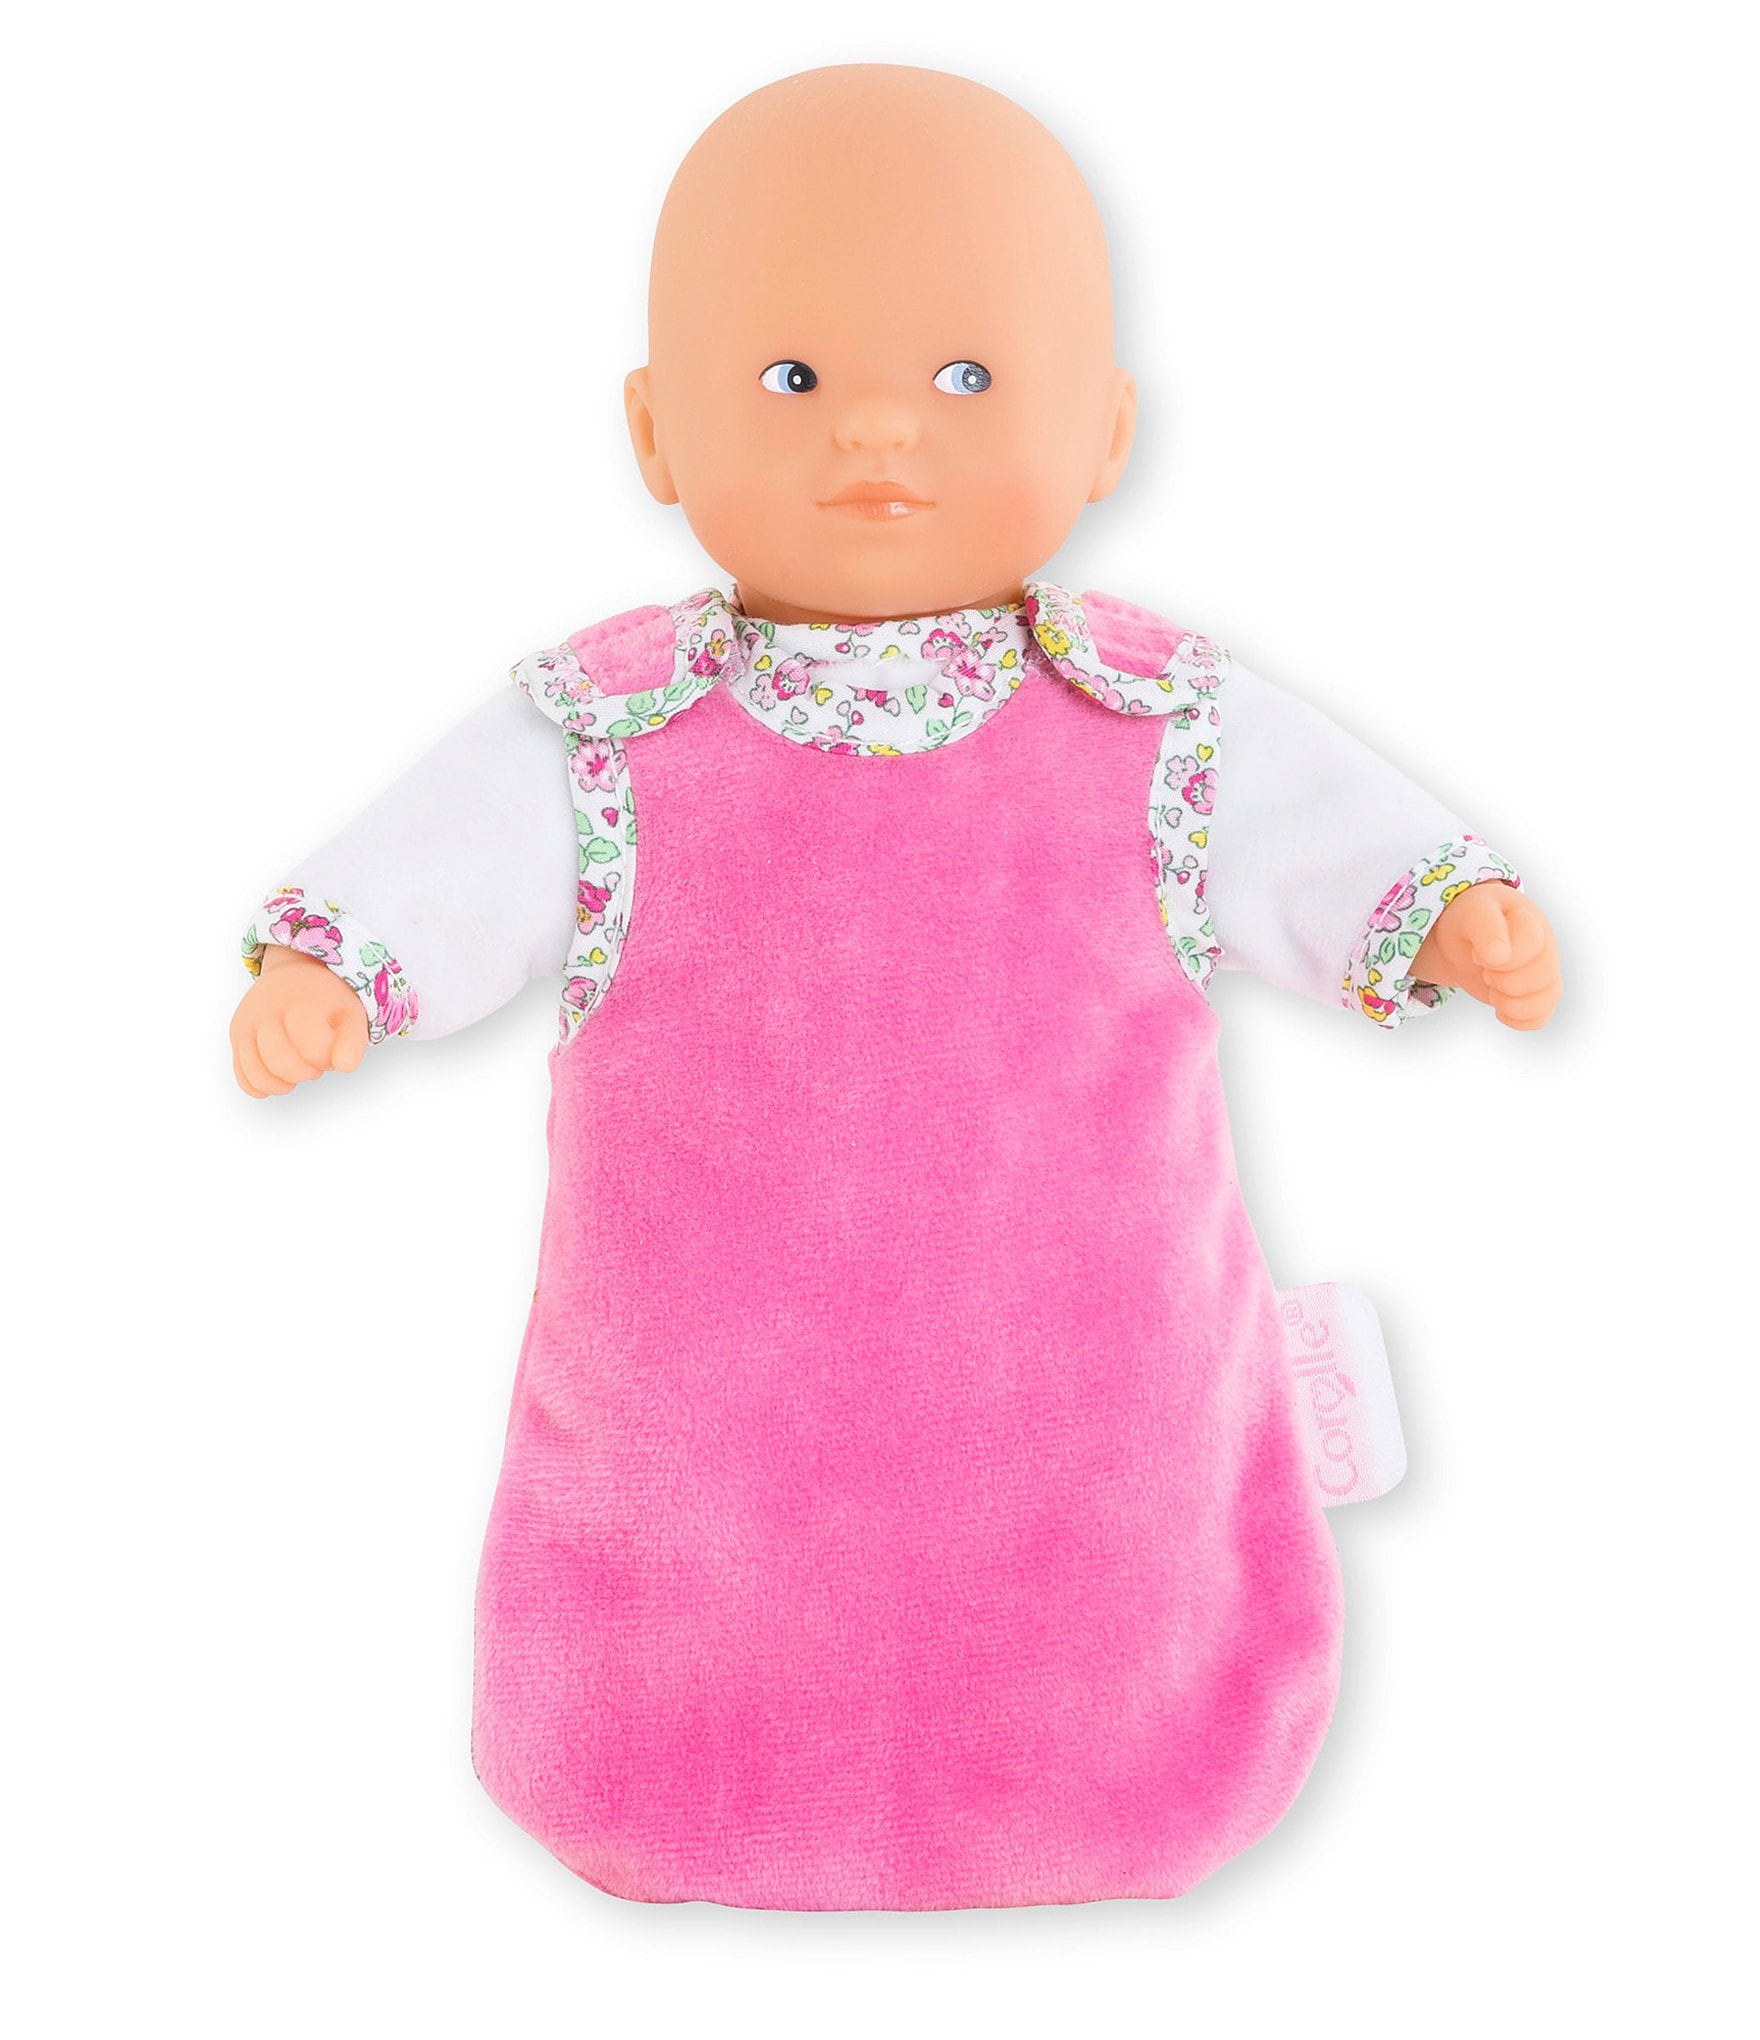 Babi Corolle(R) 2-in-1 Babiswaddle 12 Doll - Pink Cotton Flower 